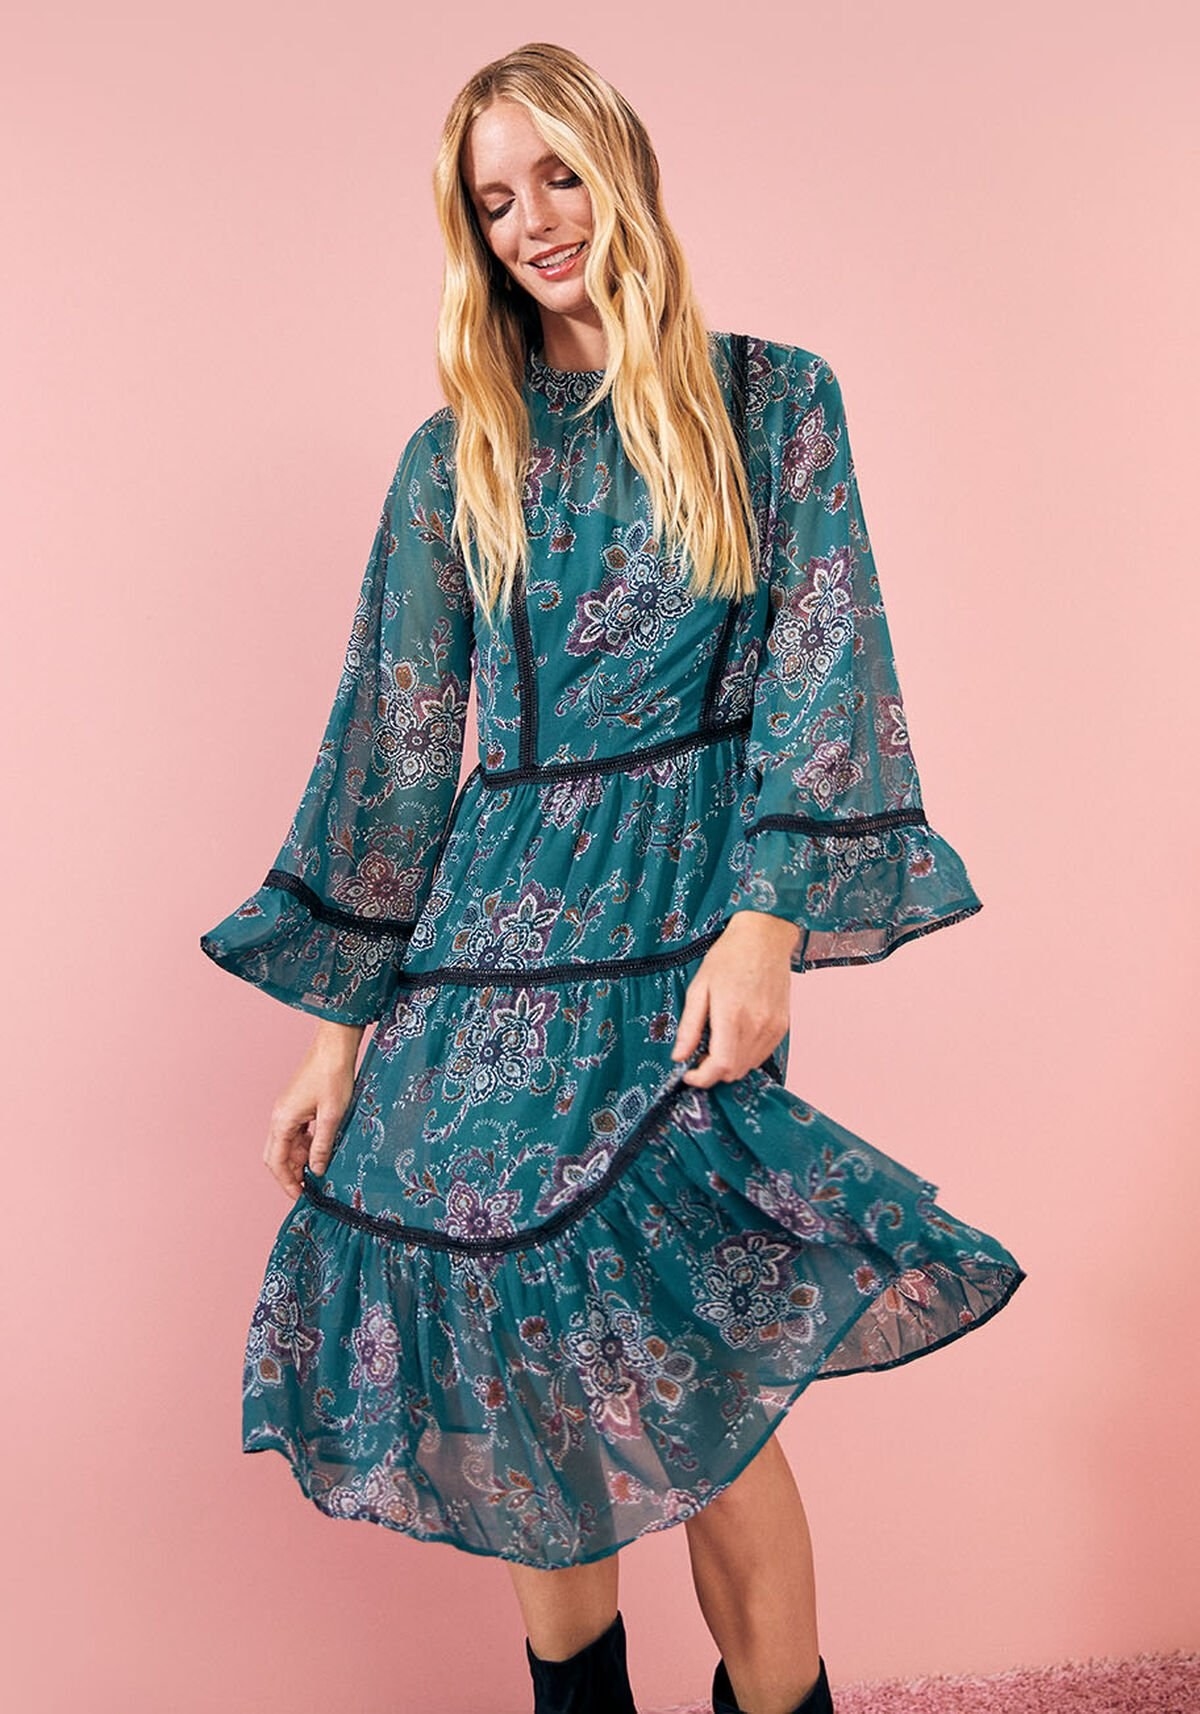 A model wears the loose midi dress with flowy bell sleeves and a tiered silhouette, made with green chiffon and a lace trim, that comes down to their knees